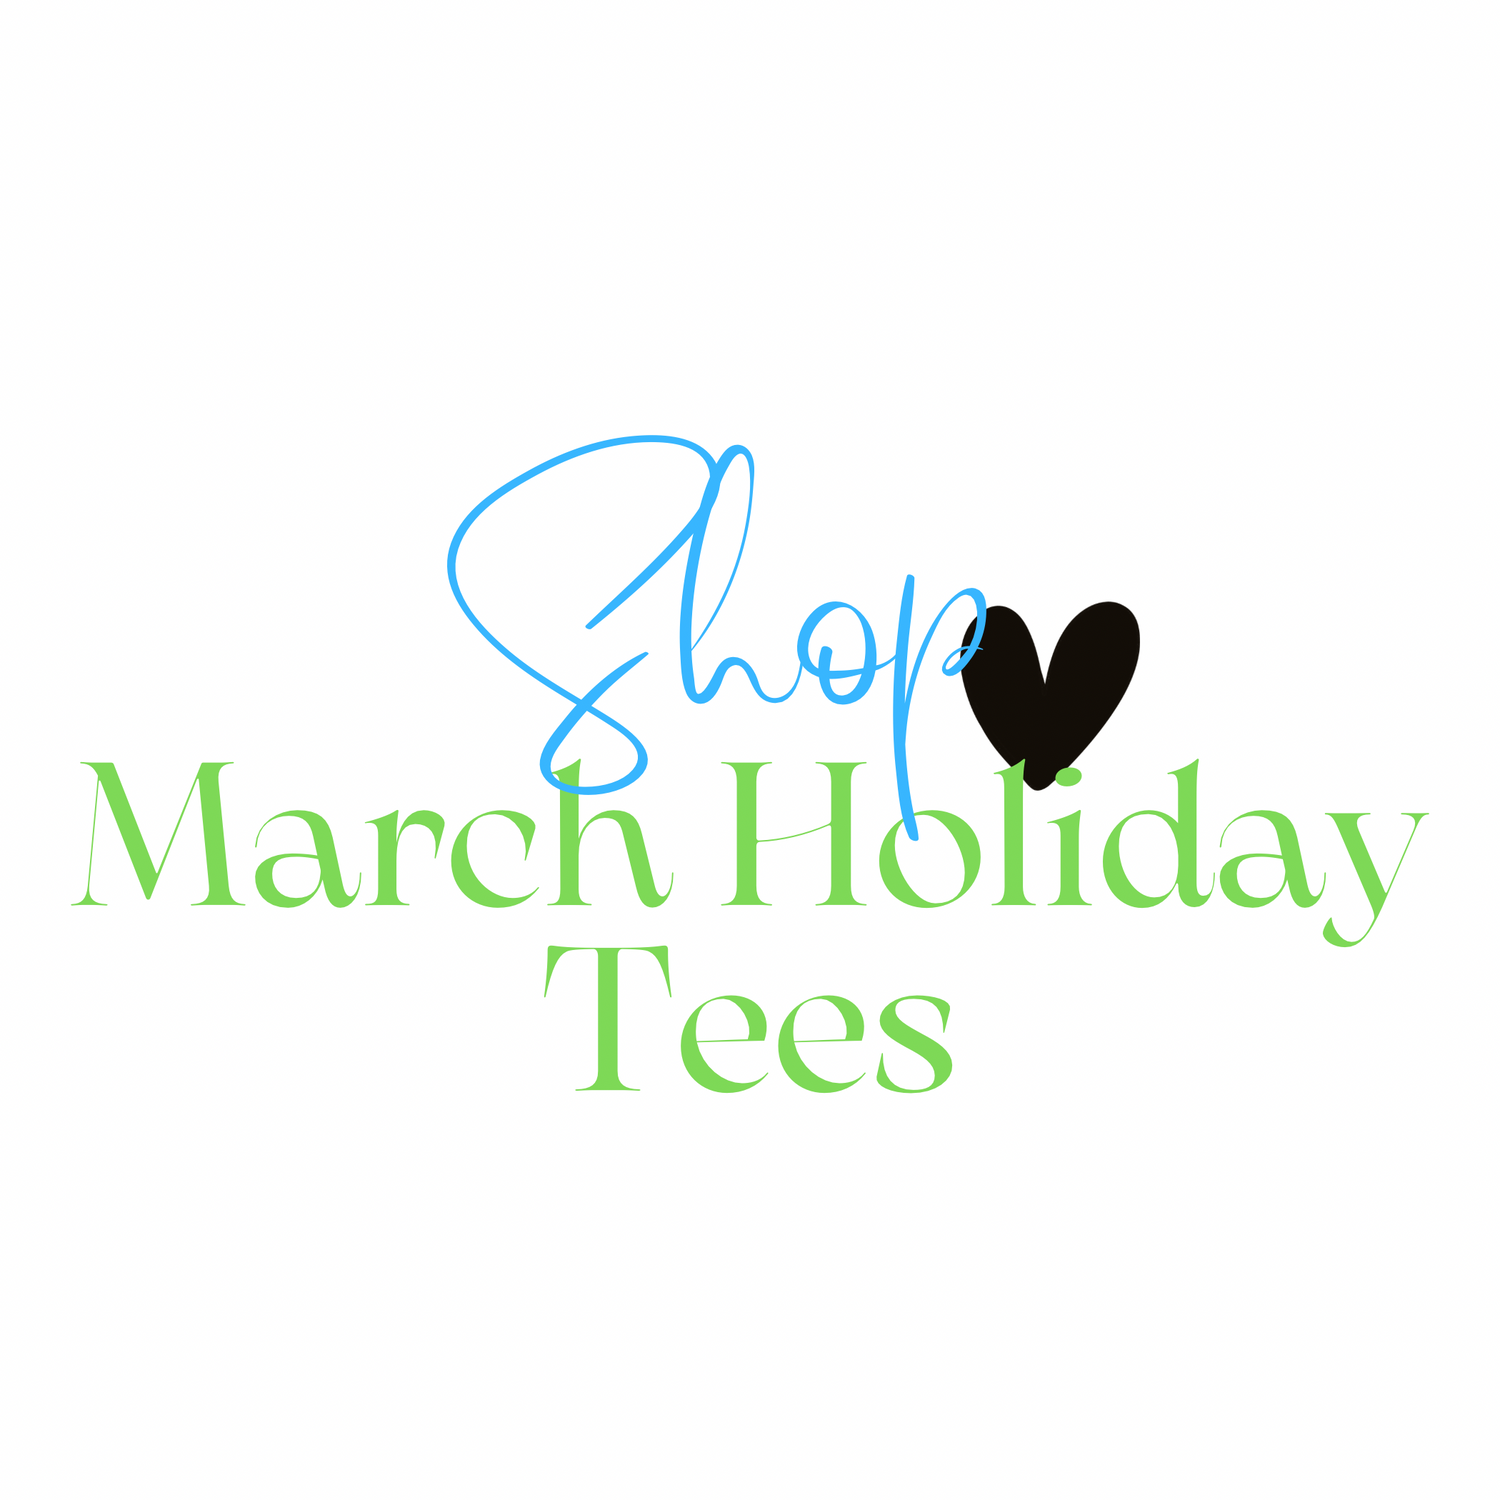 March Holiday Tees